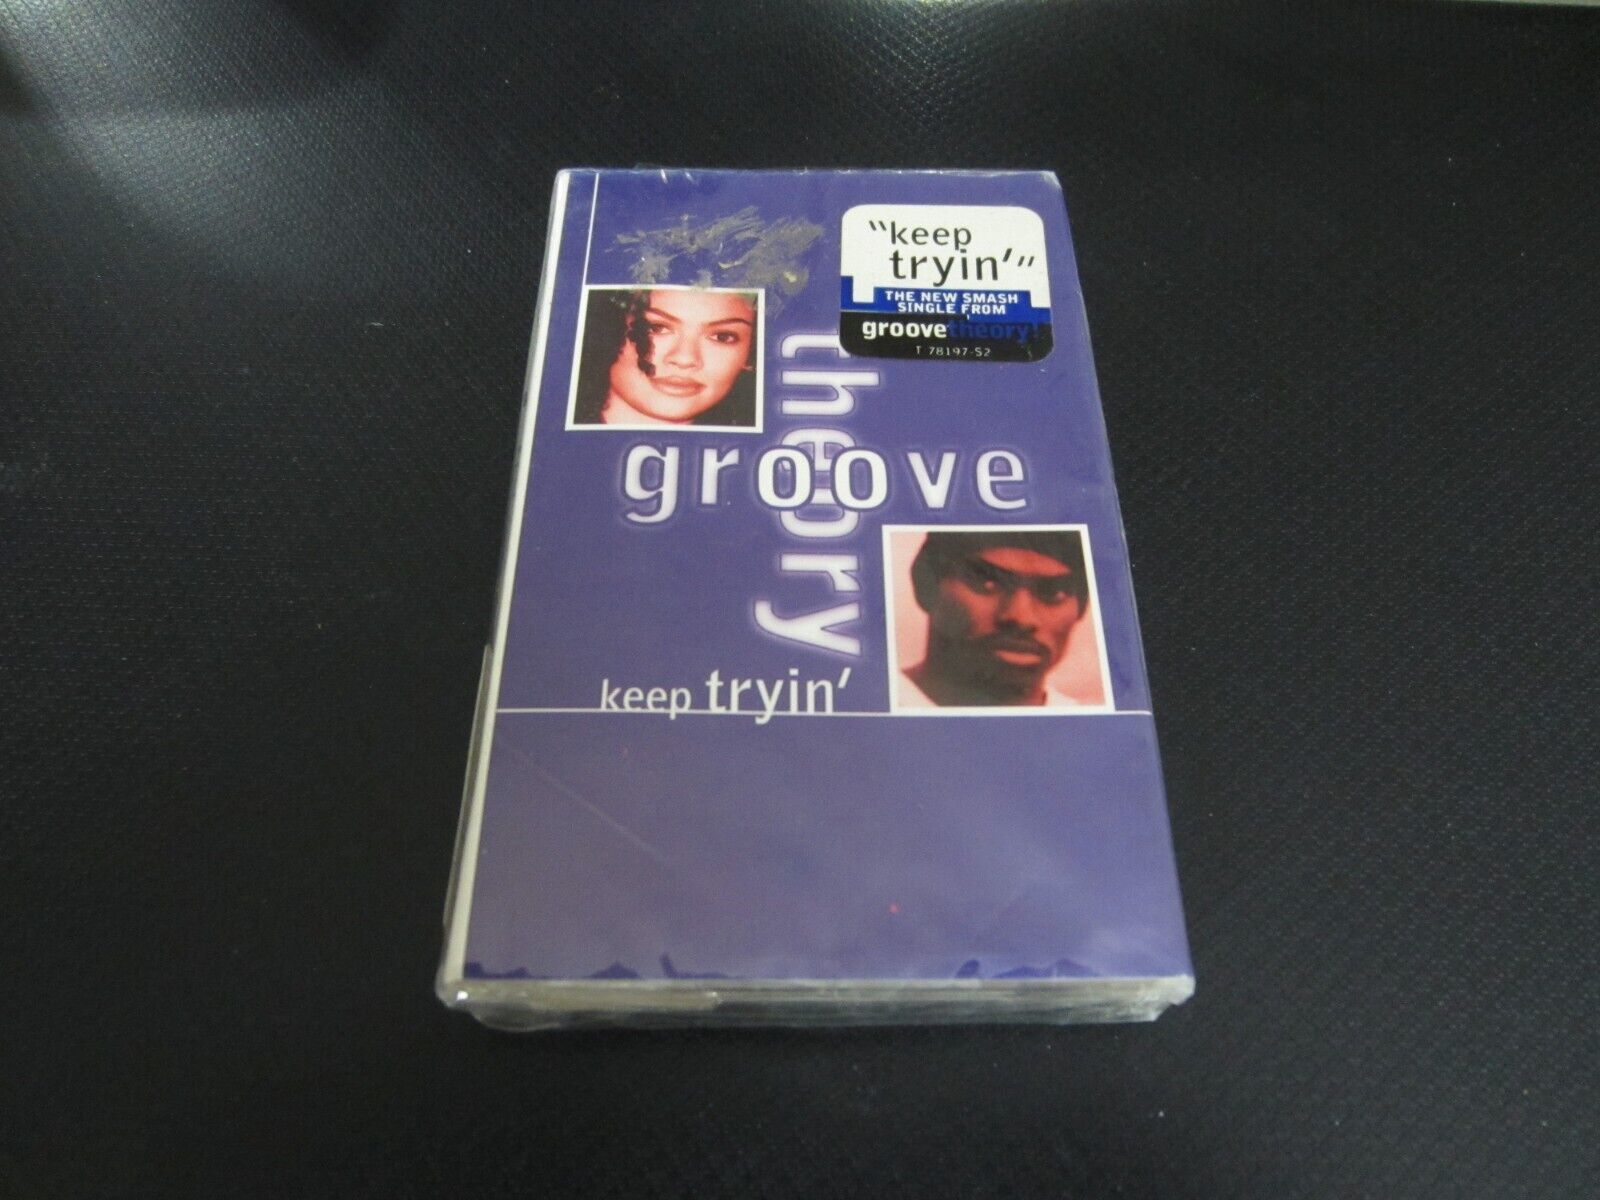 Primary image for Keep Tryin' by Groove Theory (1996, Cassette Single) - Brand New & Sealed!!!